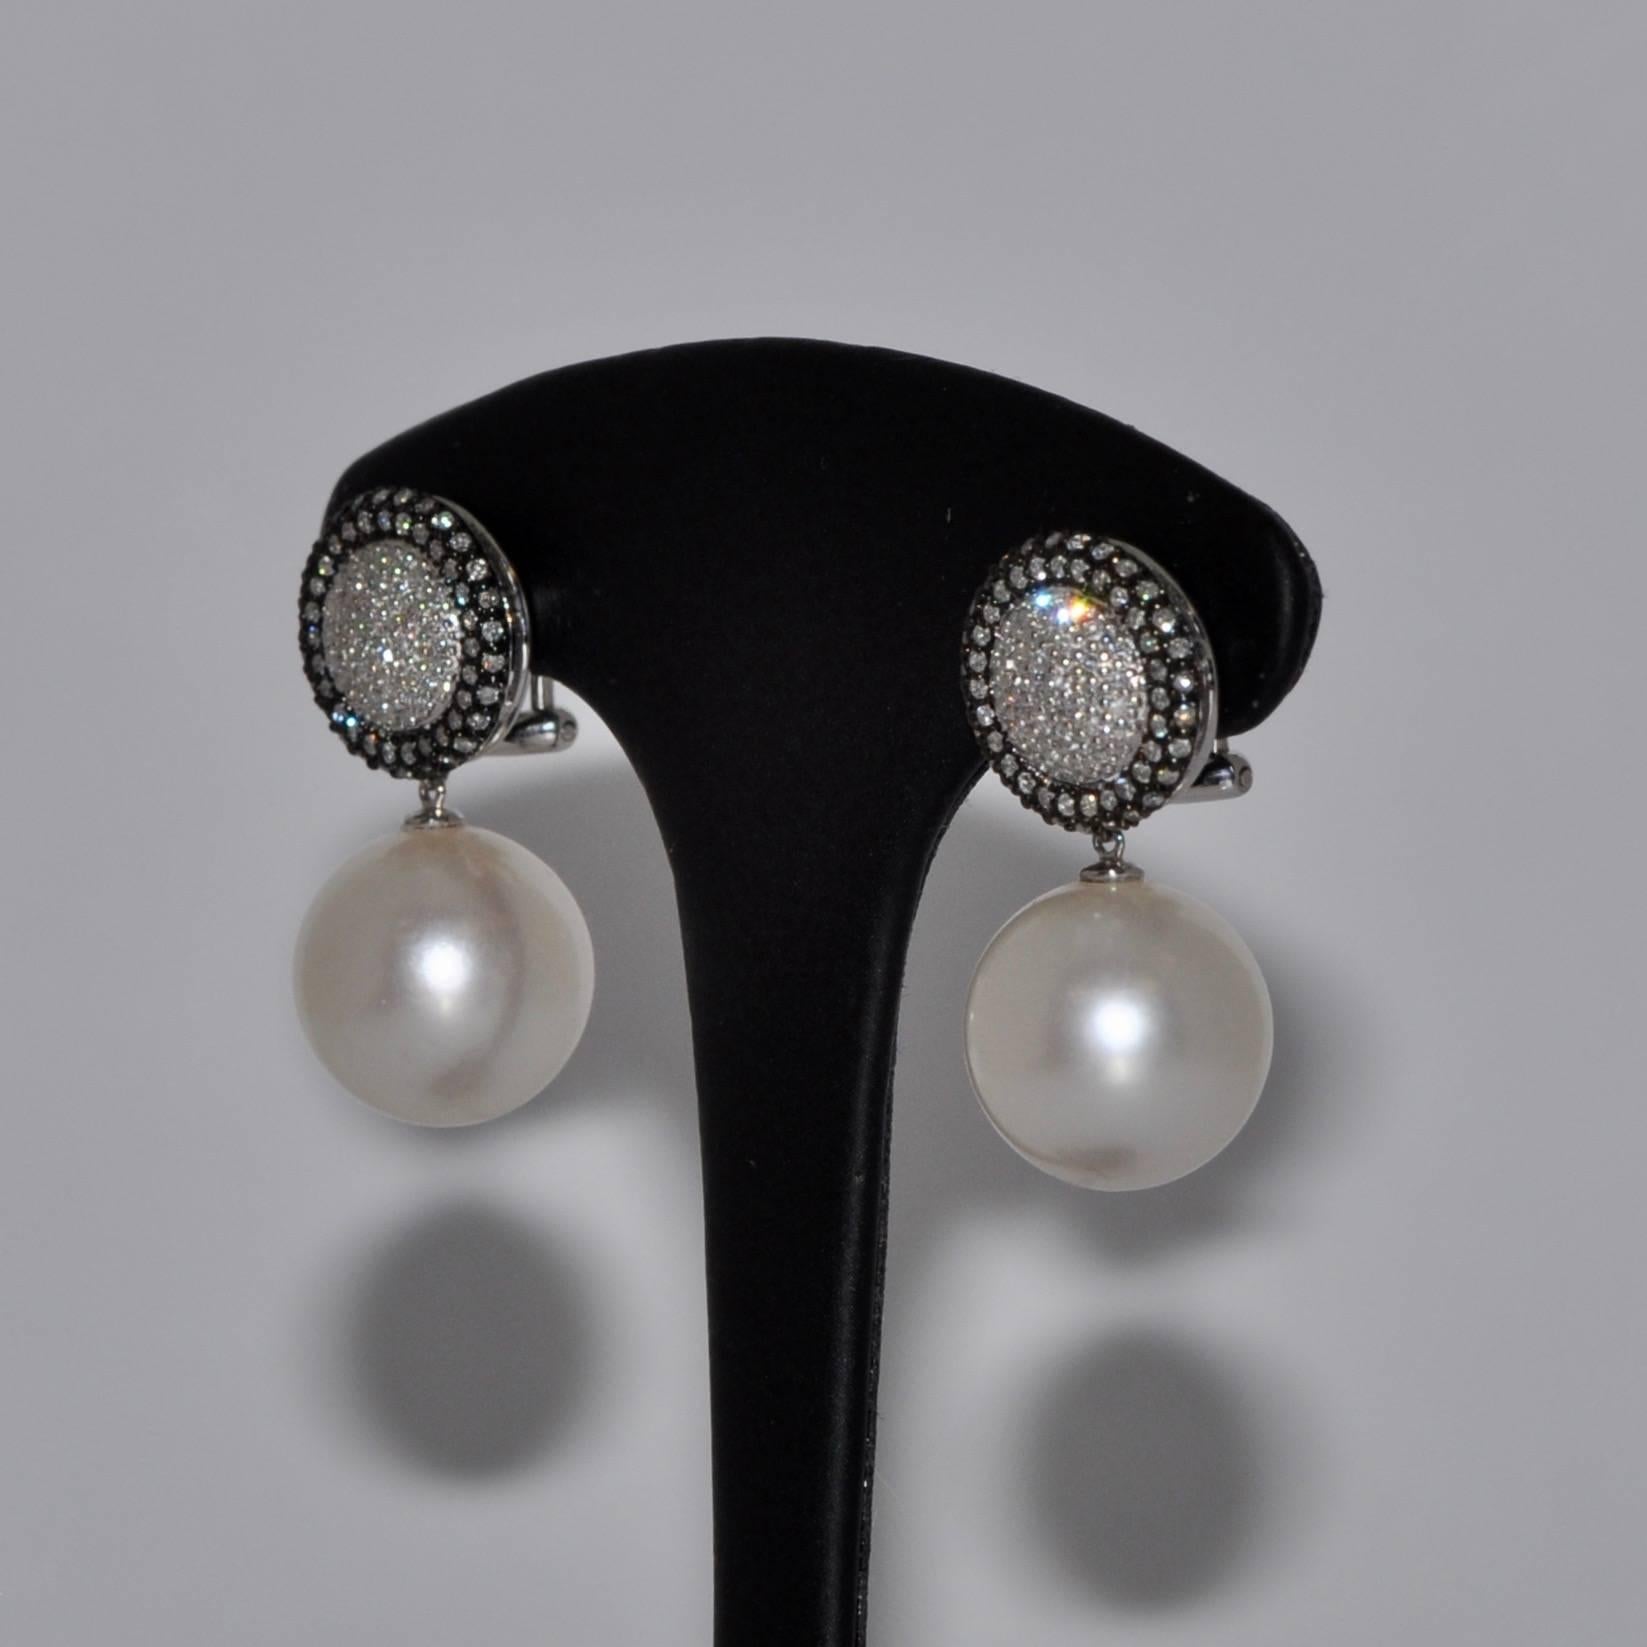 Discover this Cultured Pearls and Diamonds White Gold 18 Carat Chandelier Earrings.
Cultured Pearls
Diamonds Brilliants
White Gold 18 Carat
